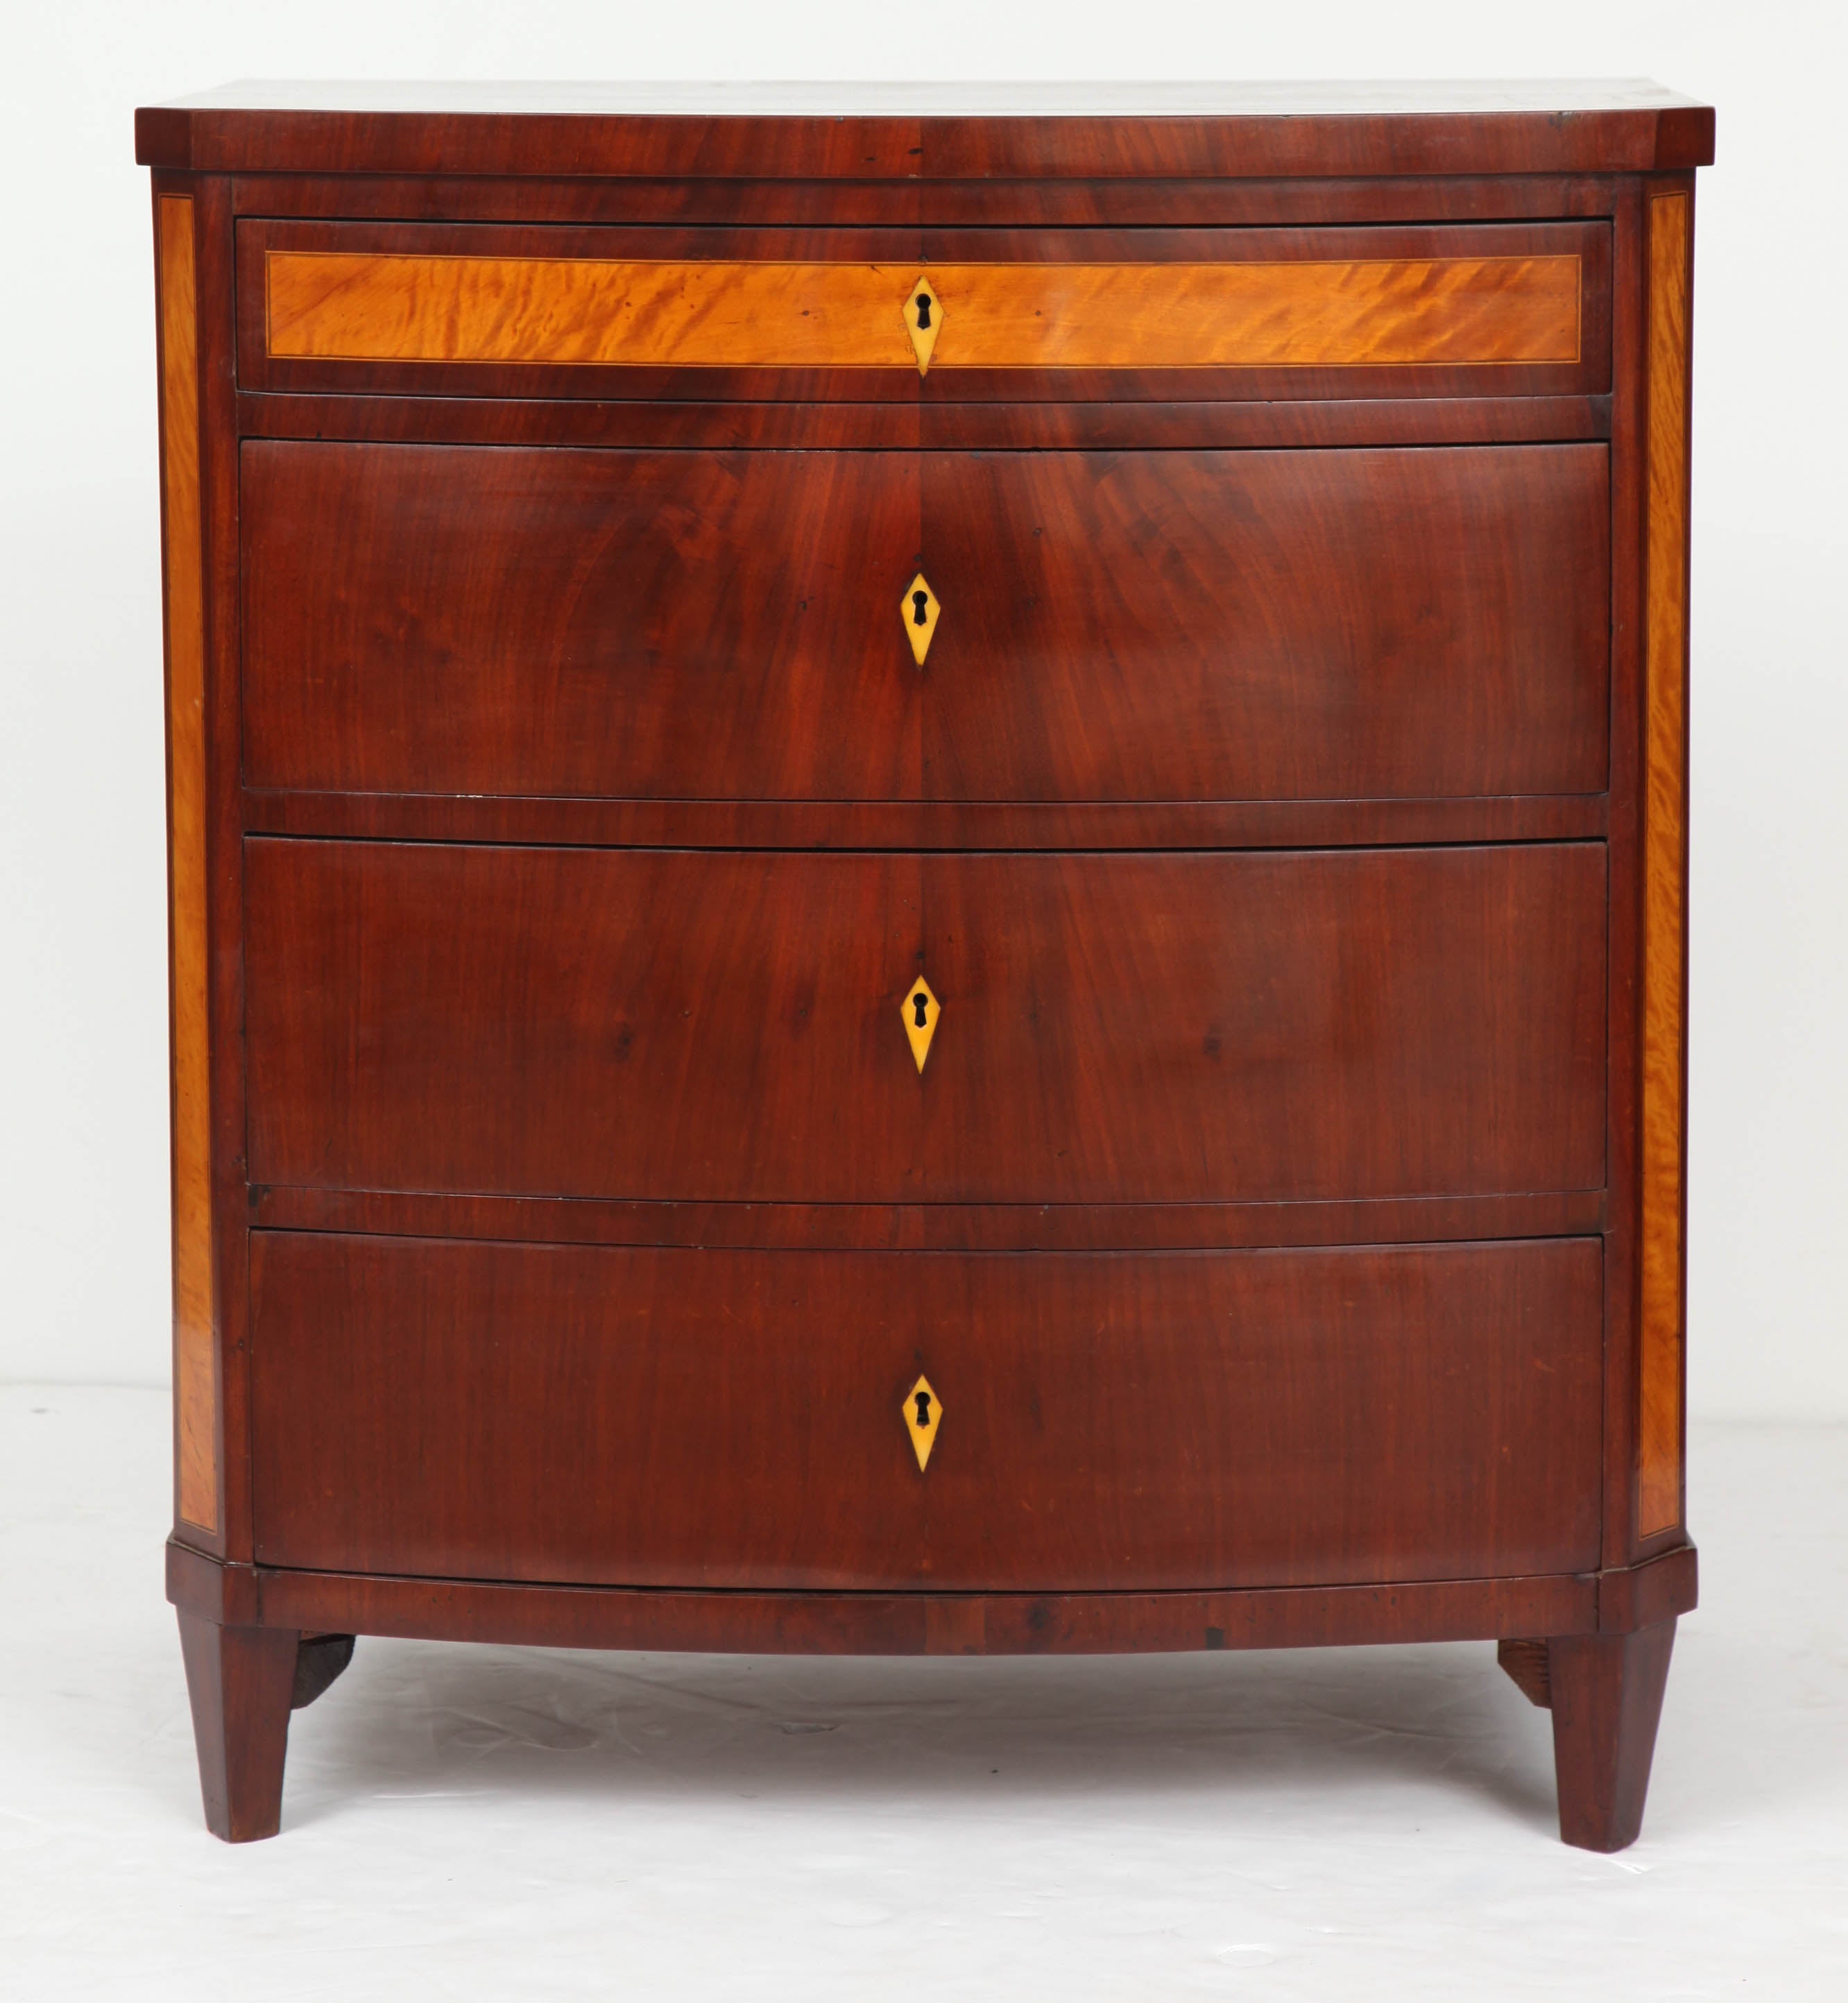 A Danish Empire mahogany and fruitwood commode, circa 1820s, the rectangular top with a bow-front and canted corners above four conforming drawers and fruitwood canted sides, the top drawer with a fruitwood inlaid panel, raised on square tapered